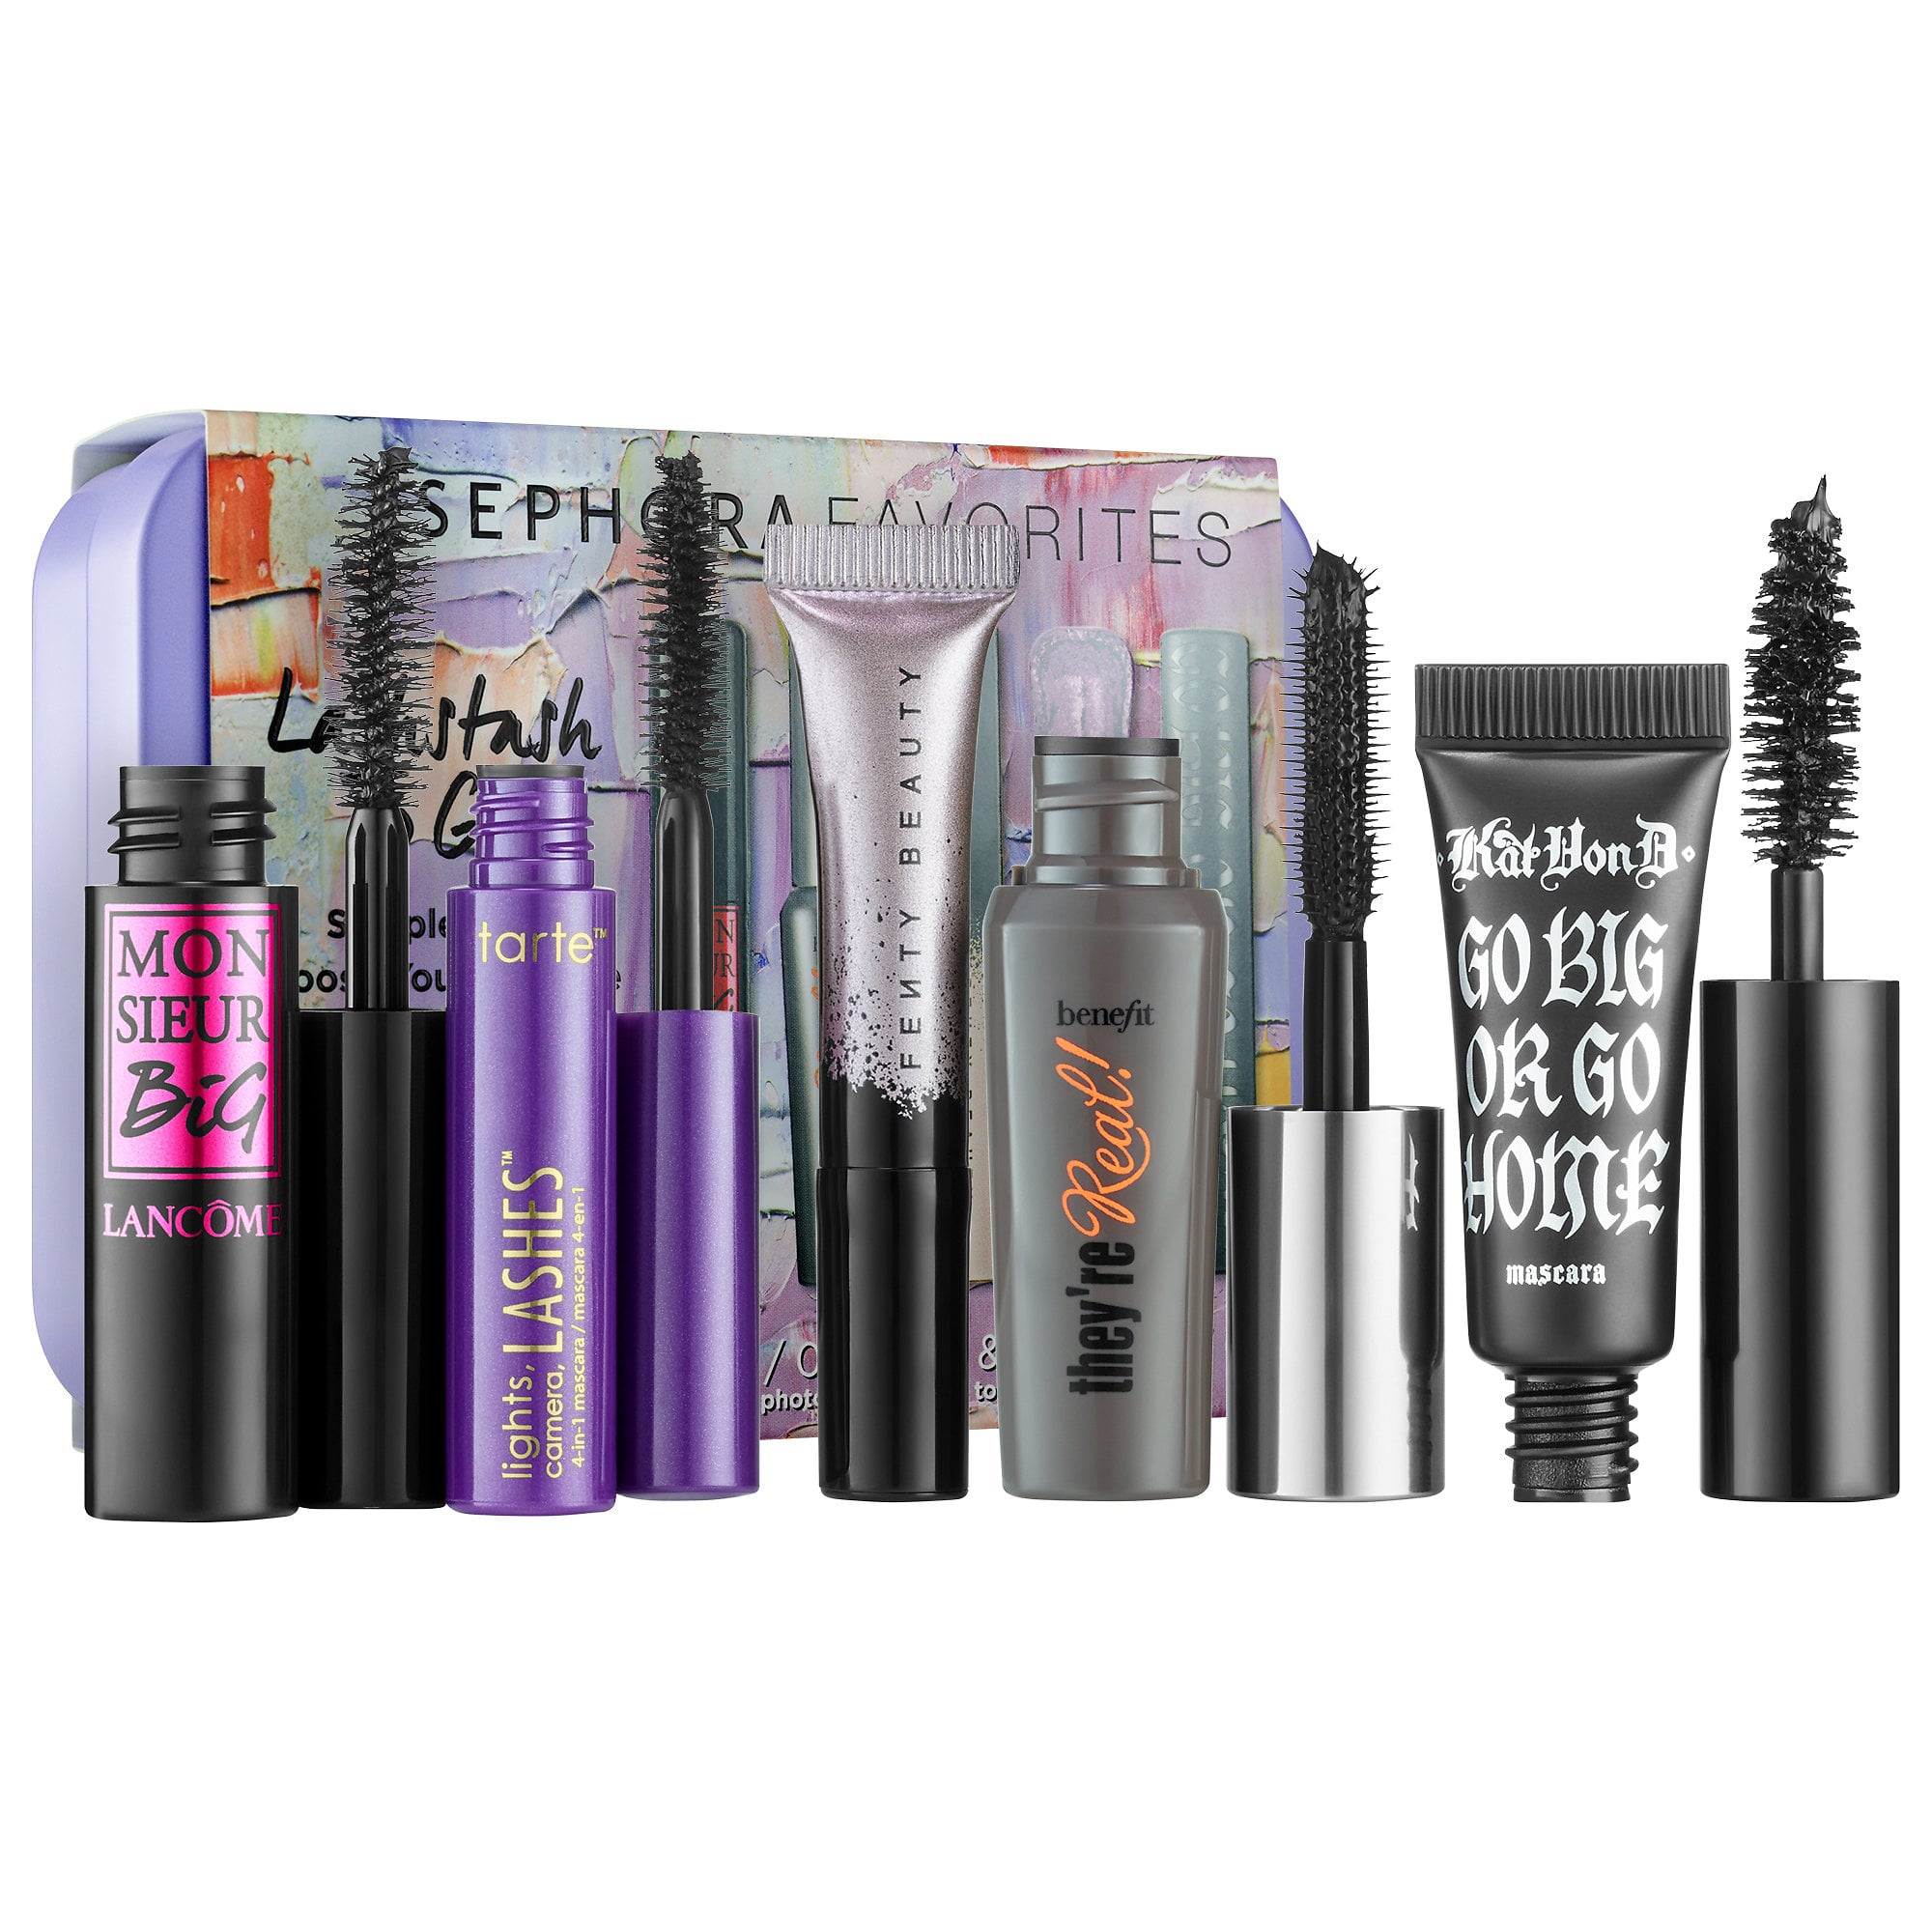 Sephora Favorites Mini Mascara Set with Full-Size Voucher | Your Next Product Be Hidden in One of These Sephora Favorites Sets? POPSUGAR Beauty Photo 8